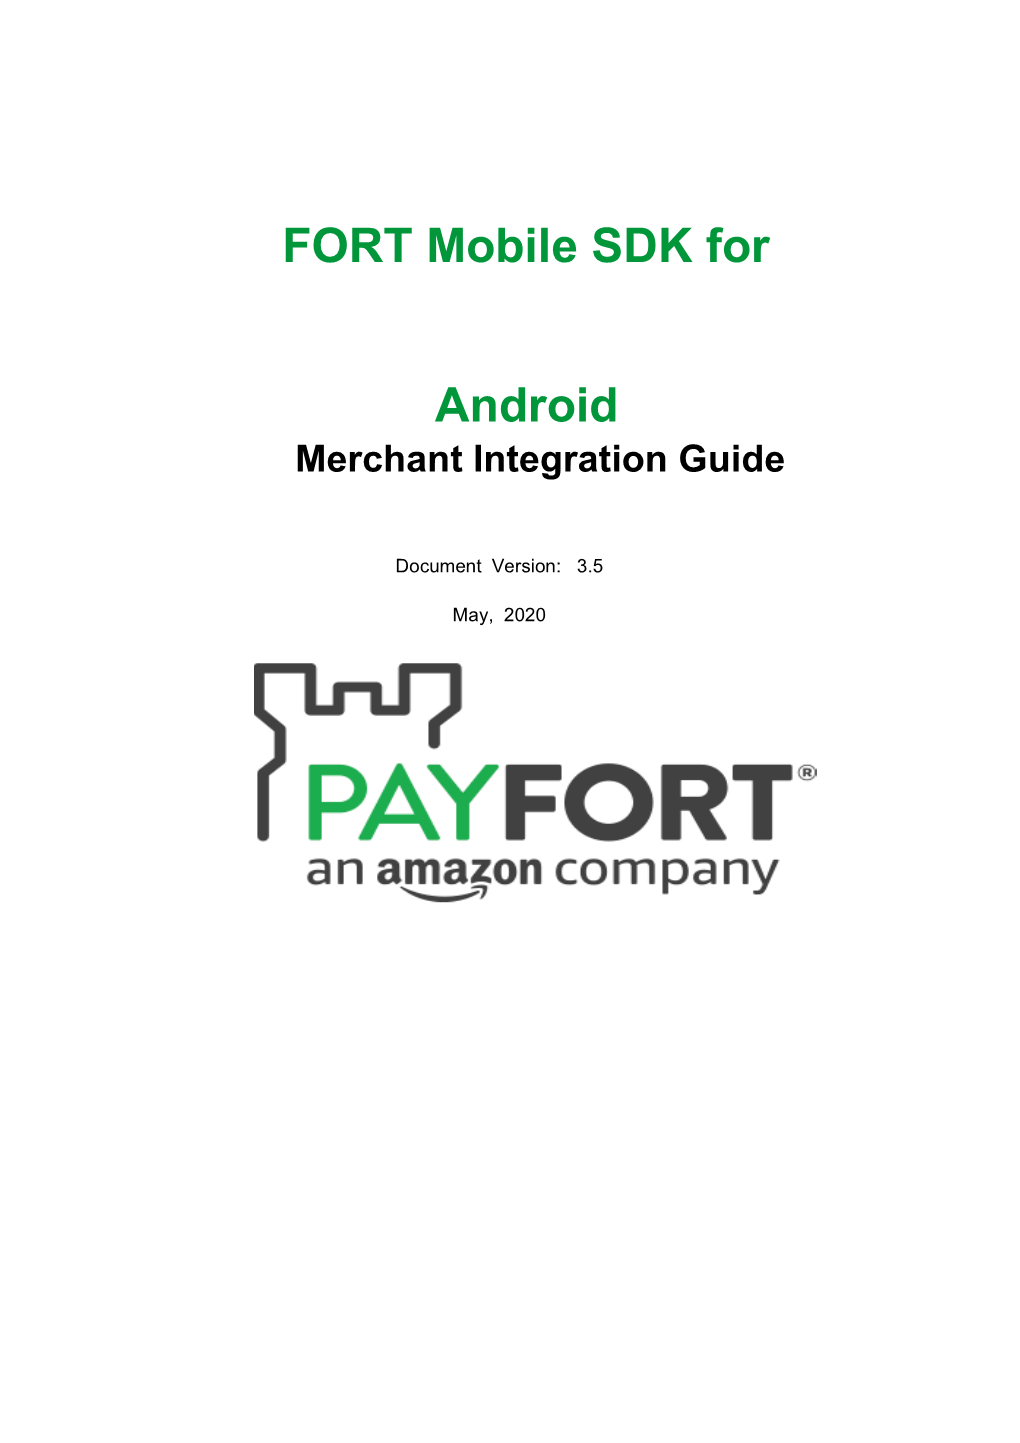 FORT Mobile SDK for Android